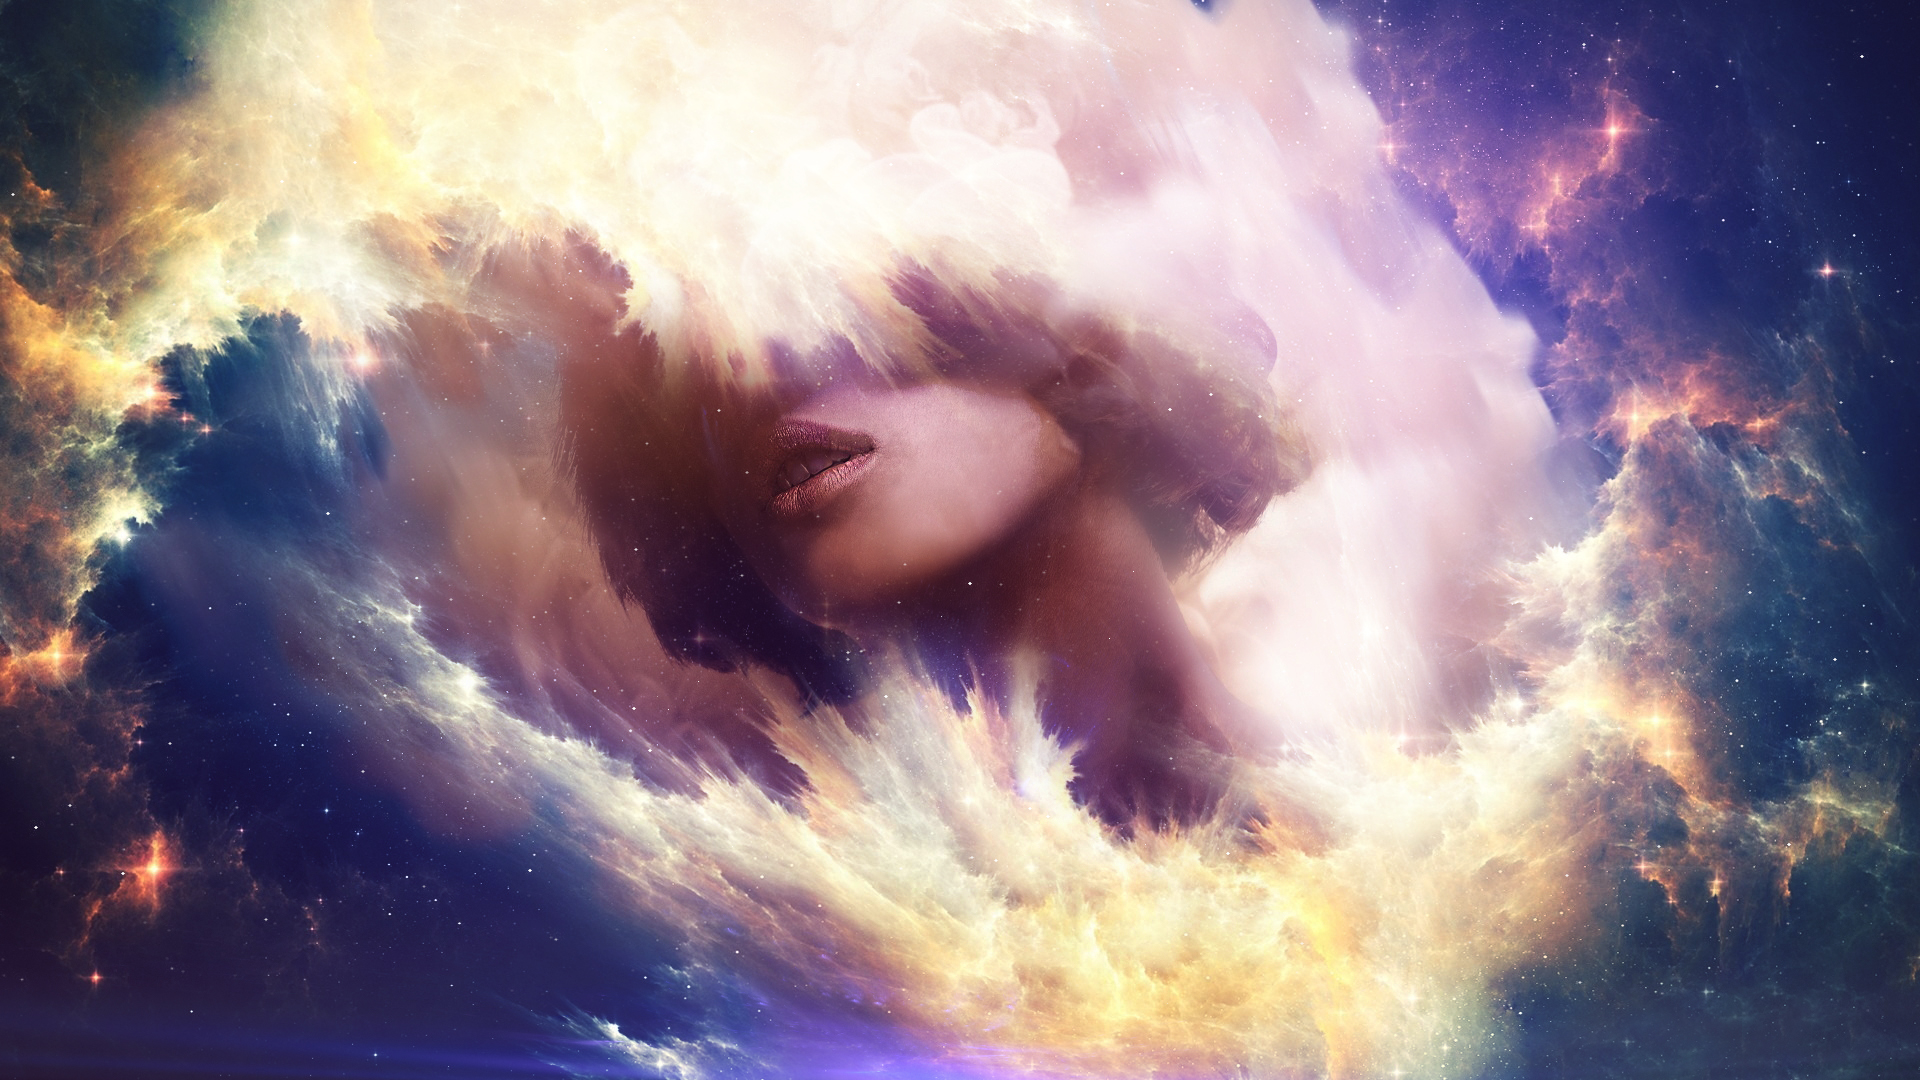 Women Clouds Illusion Artwork Colorful Emotionless 1920x1080